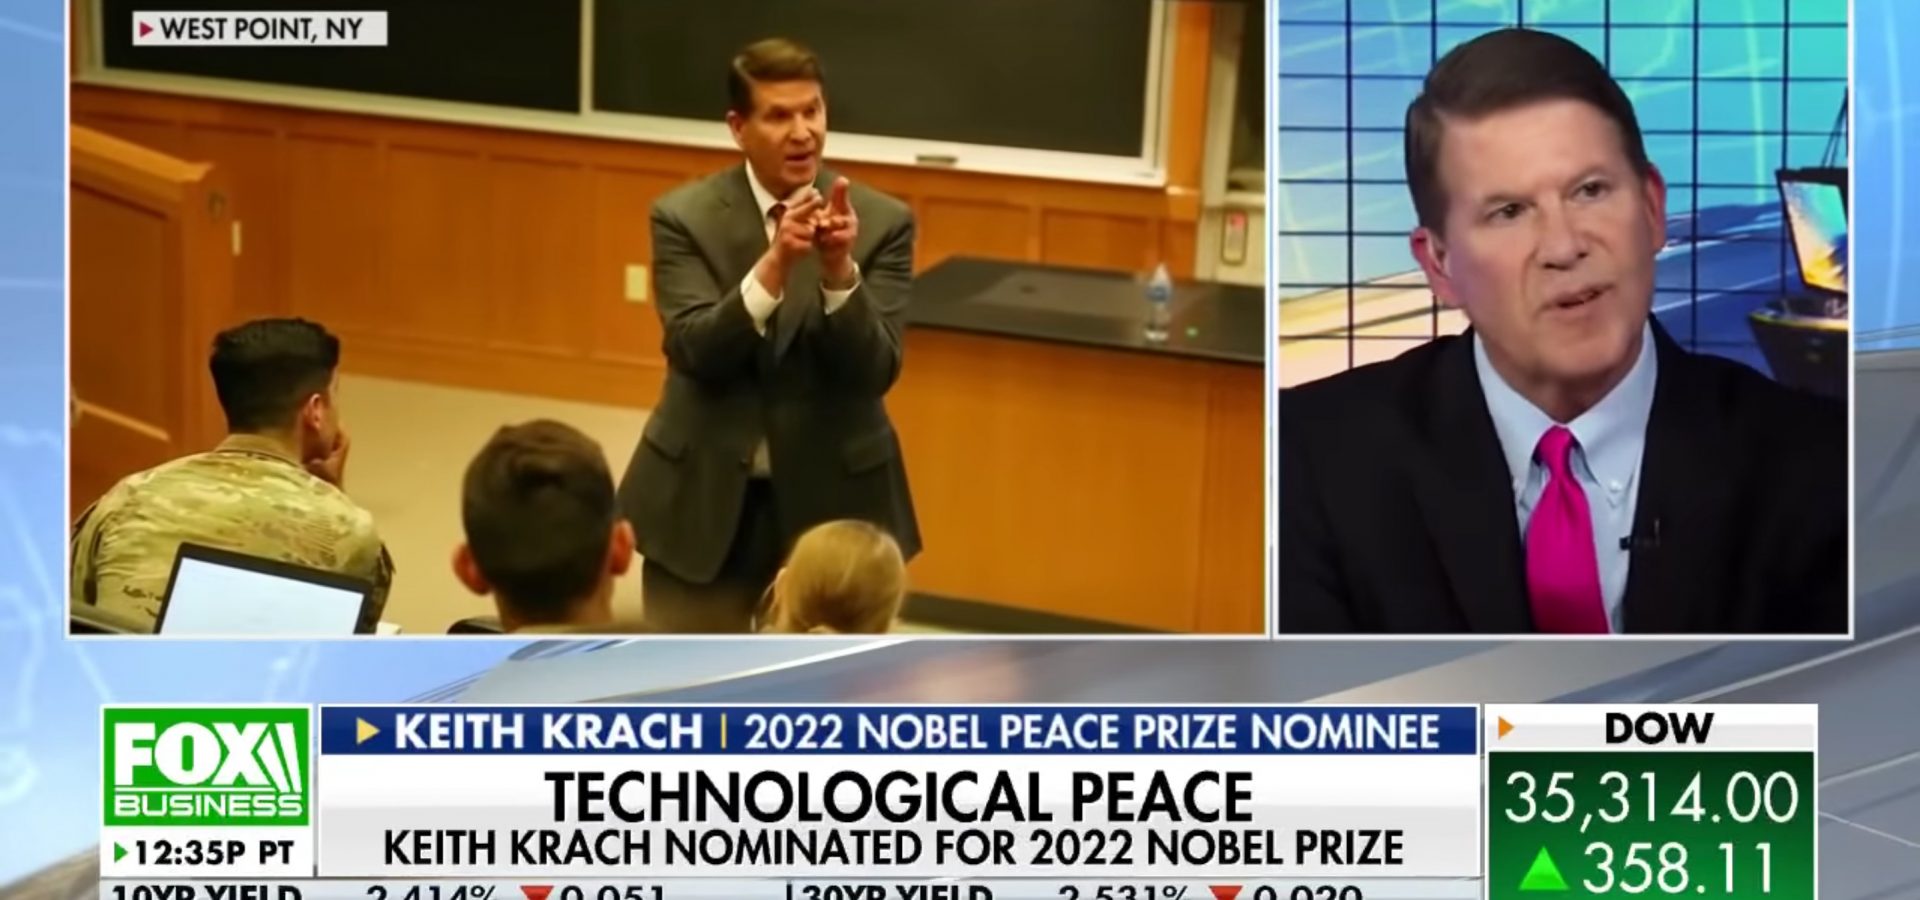 Keith Krach, Former Chairman of Purdue’s Board of Trustees, Nominated for 2022 Nobel Peace Prize